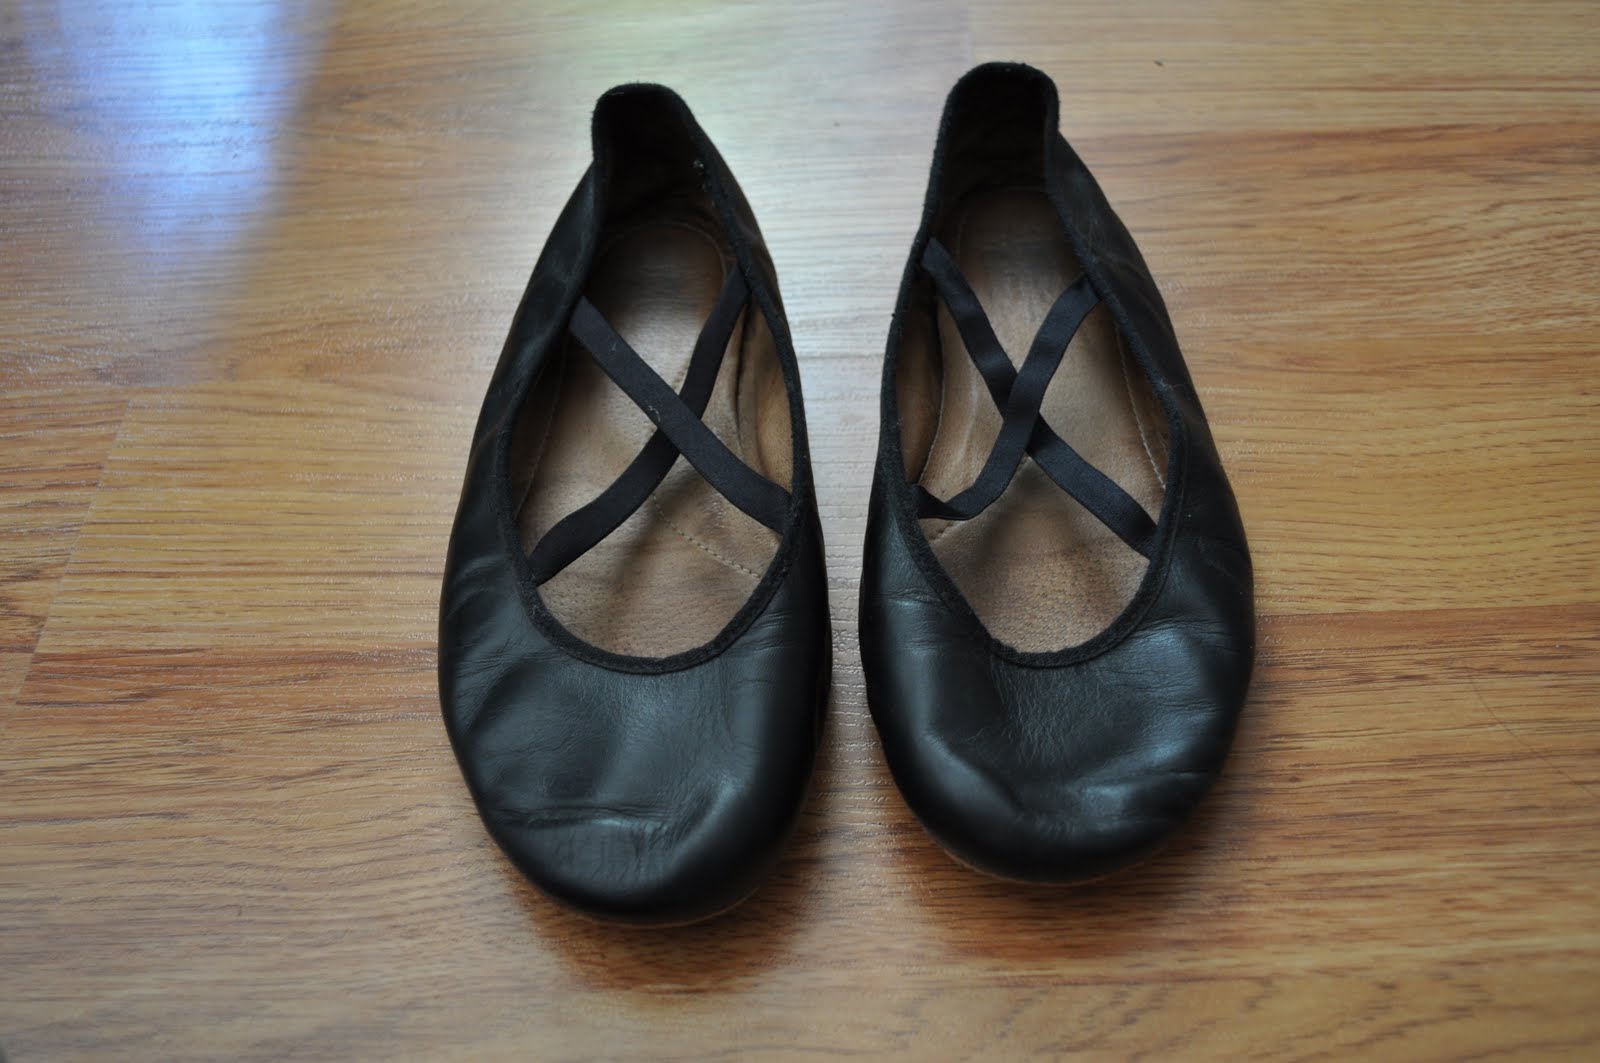 laws of general economy: Bloch Ballet Flats 8